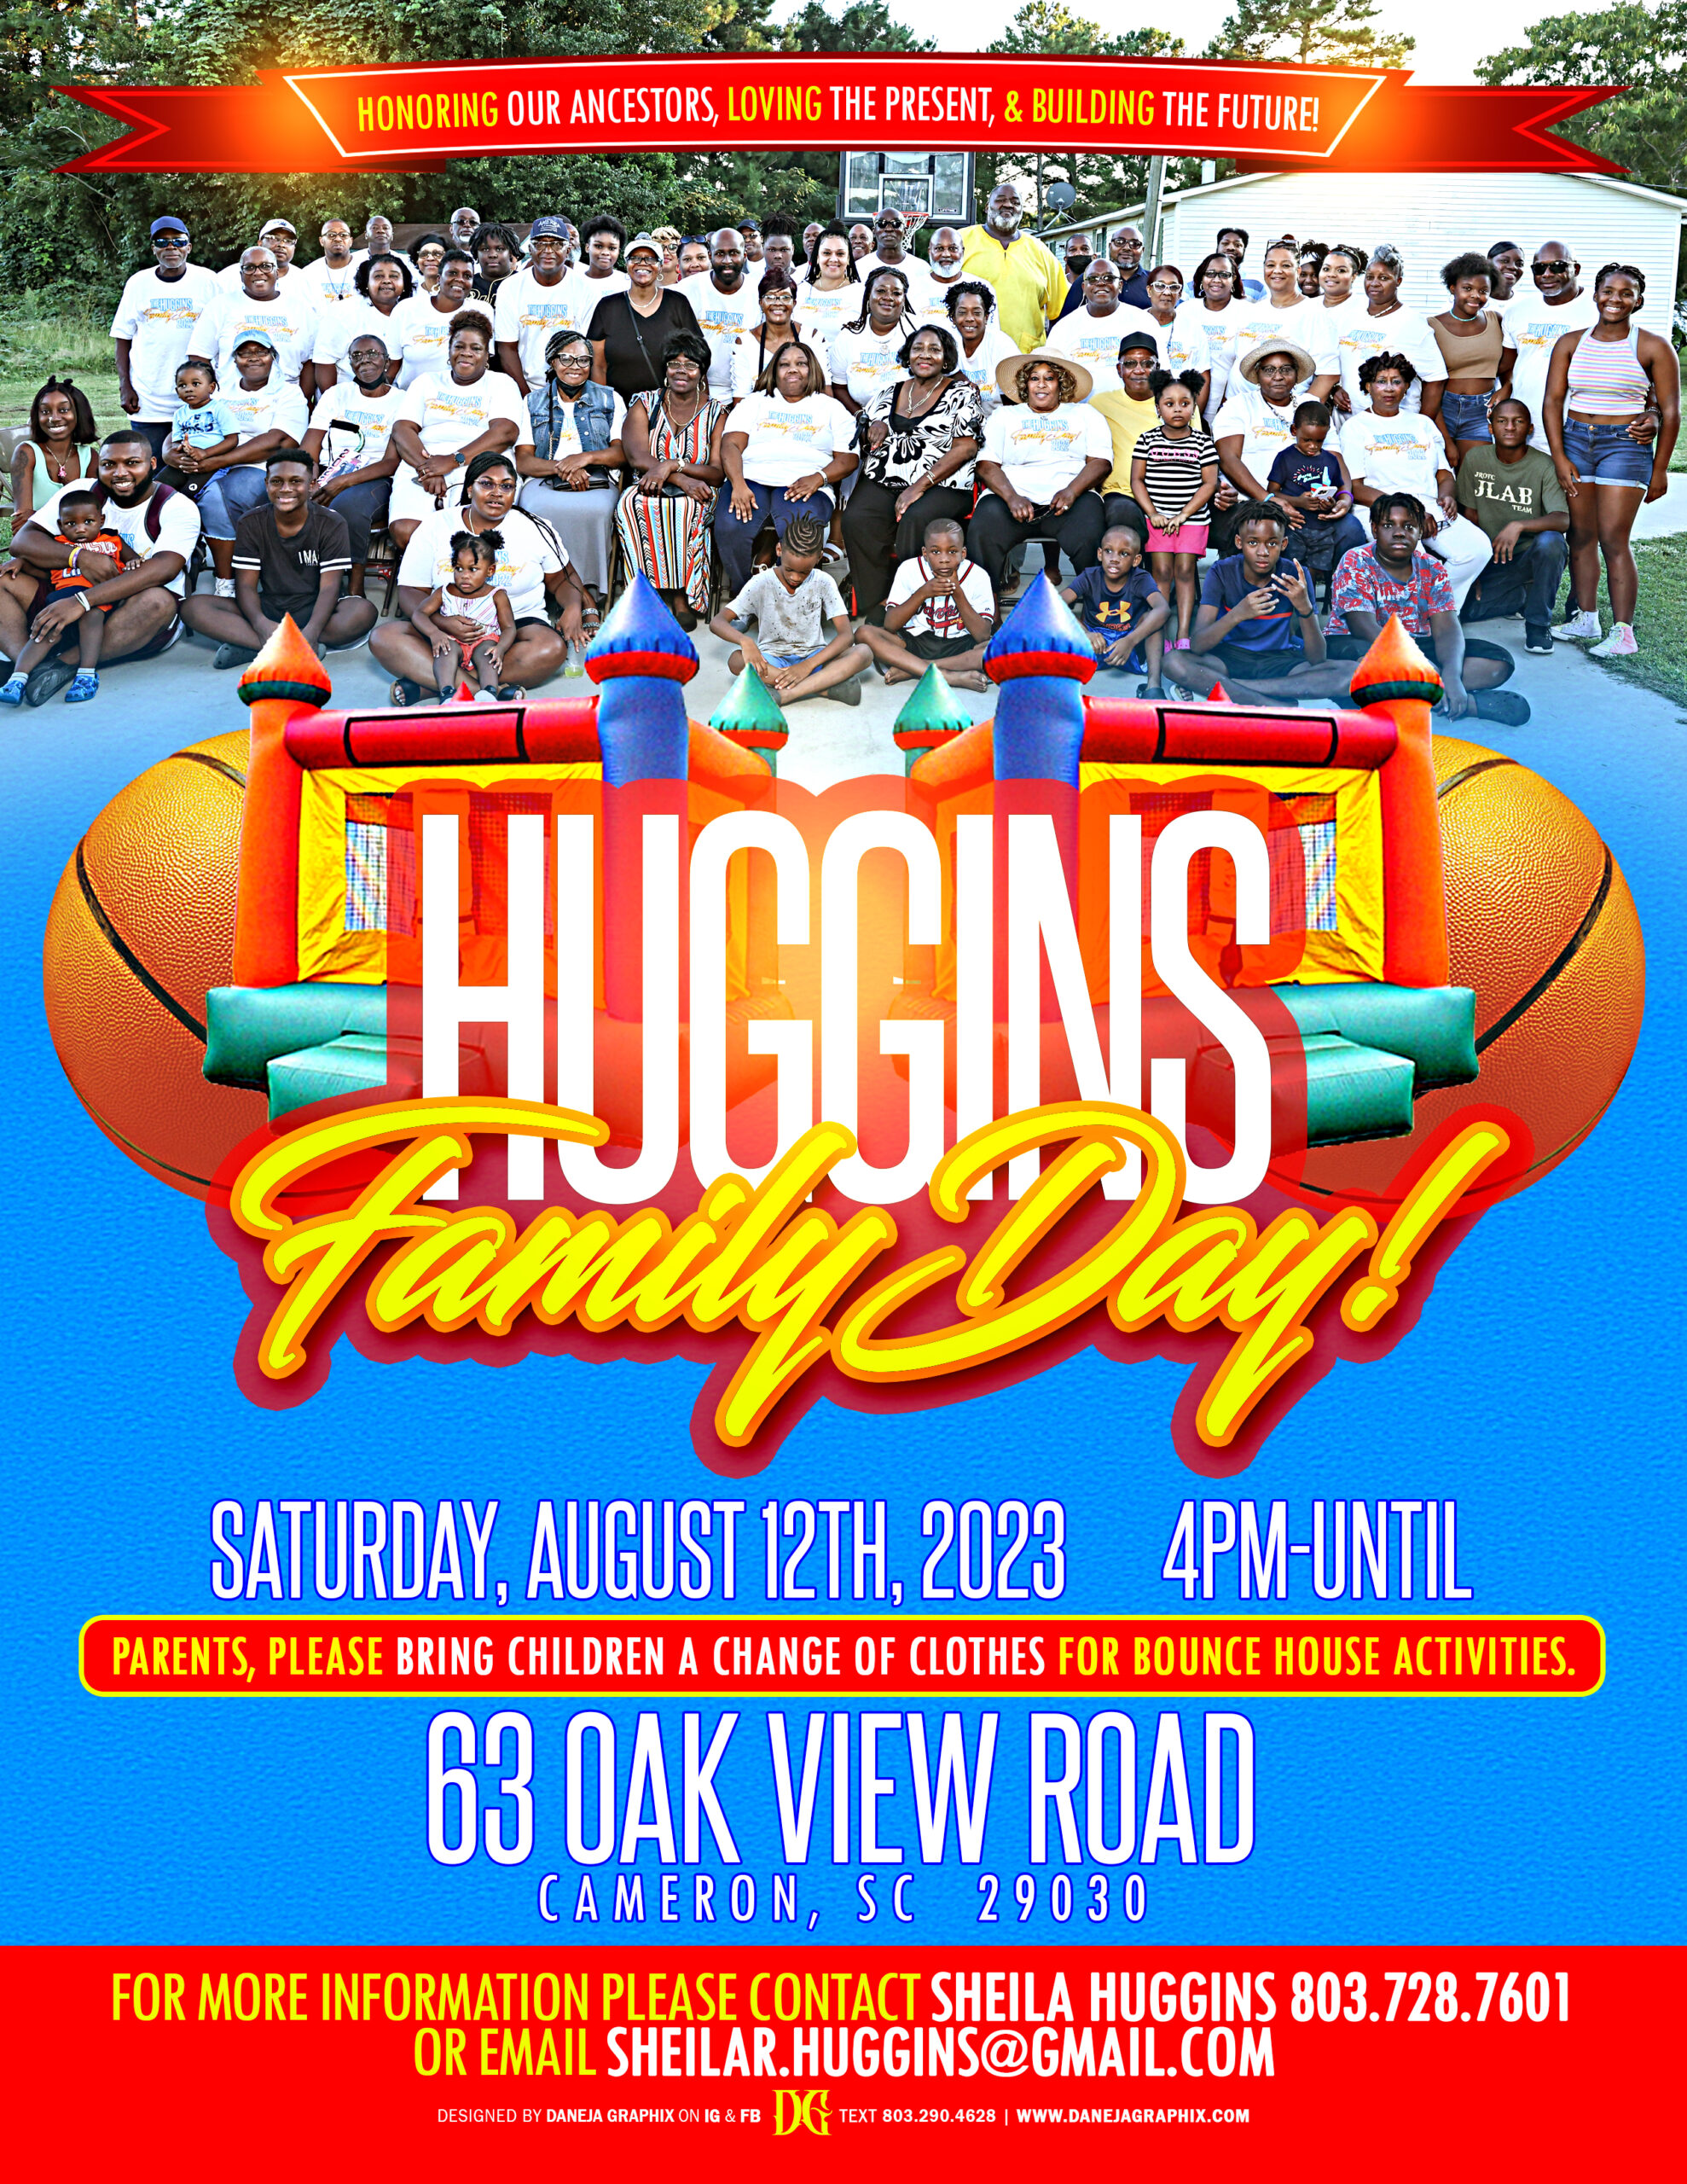 The Huggins Family Day